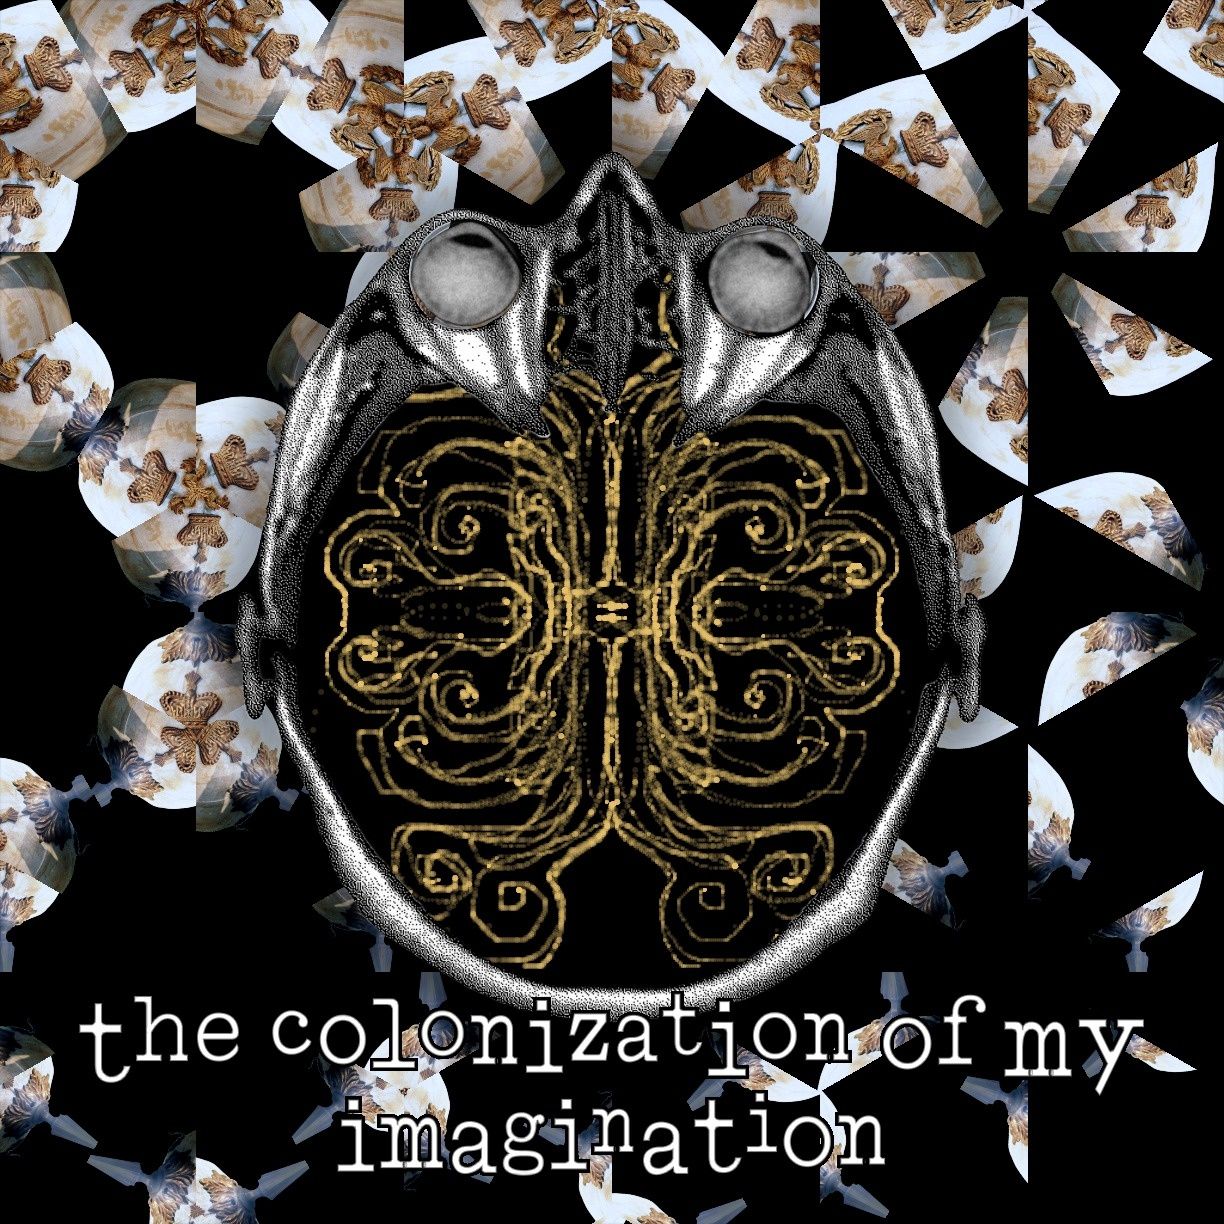 the colonization of my imagination